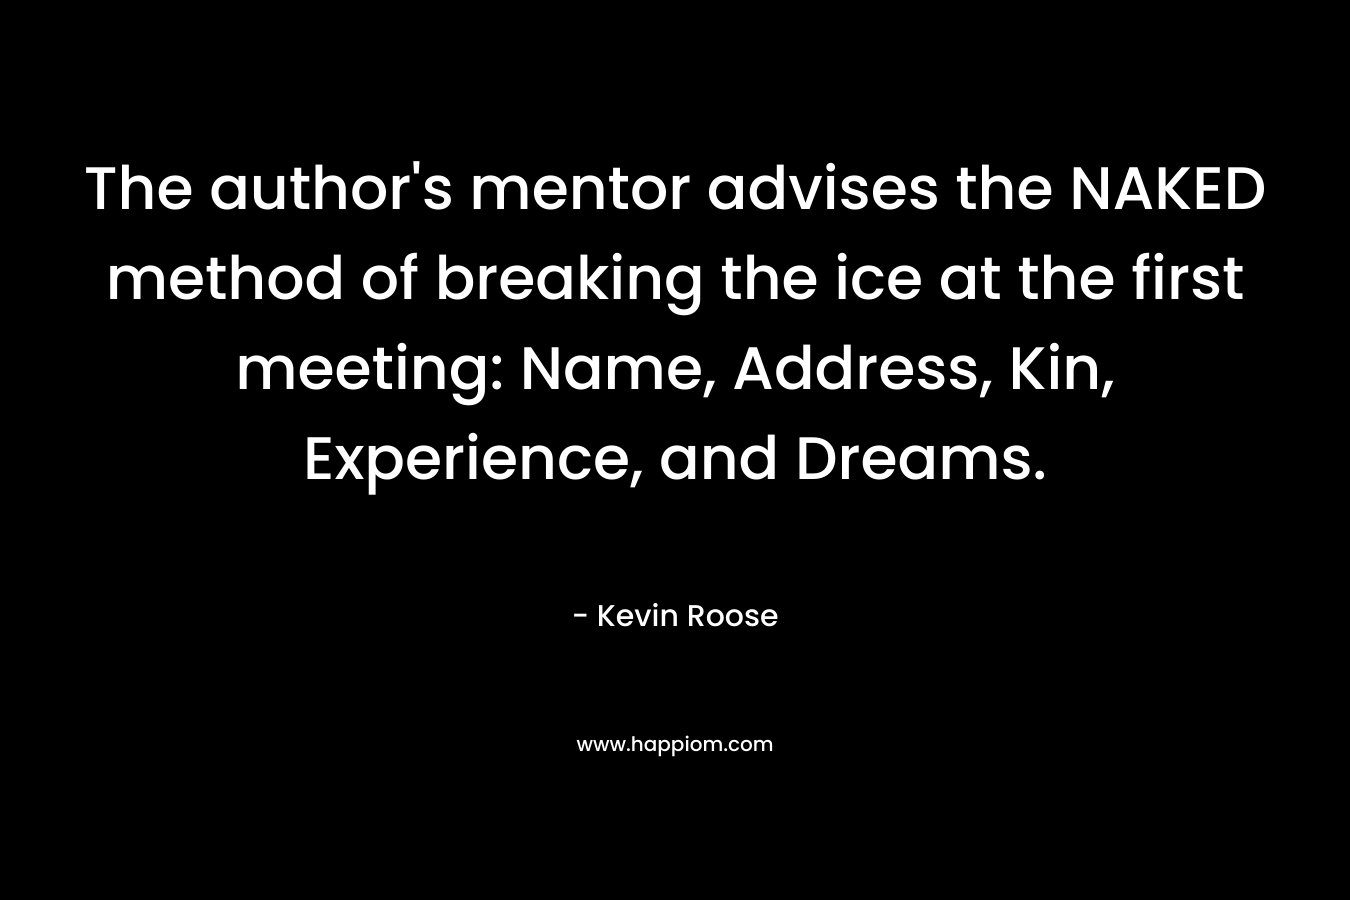 The author's mentor advises the NAKED method of breaking the ice at the first meeting: Name, Address, Kin, Experience, and Dreams.